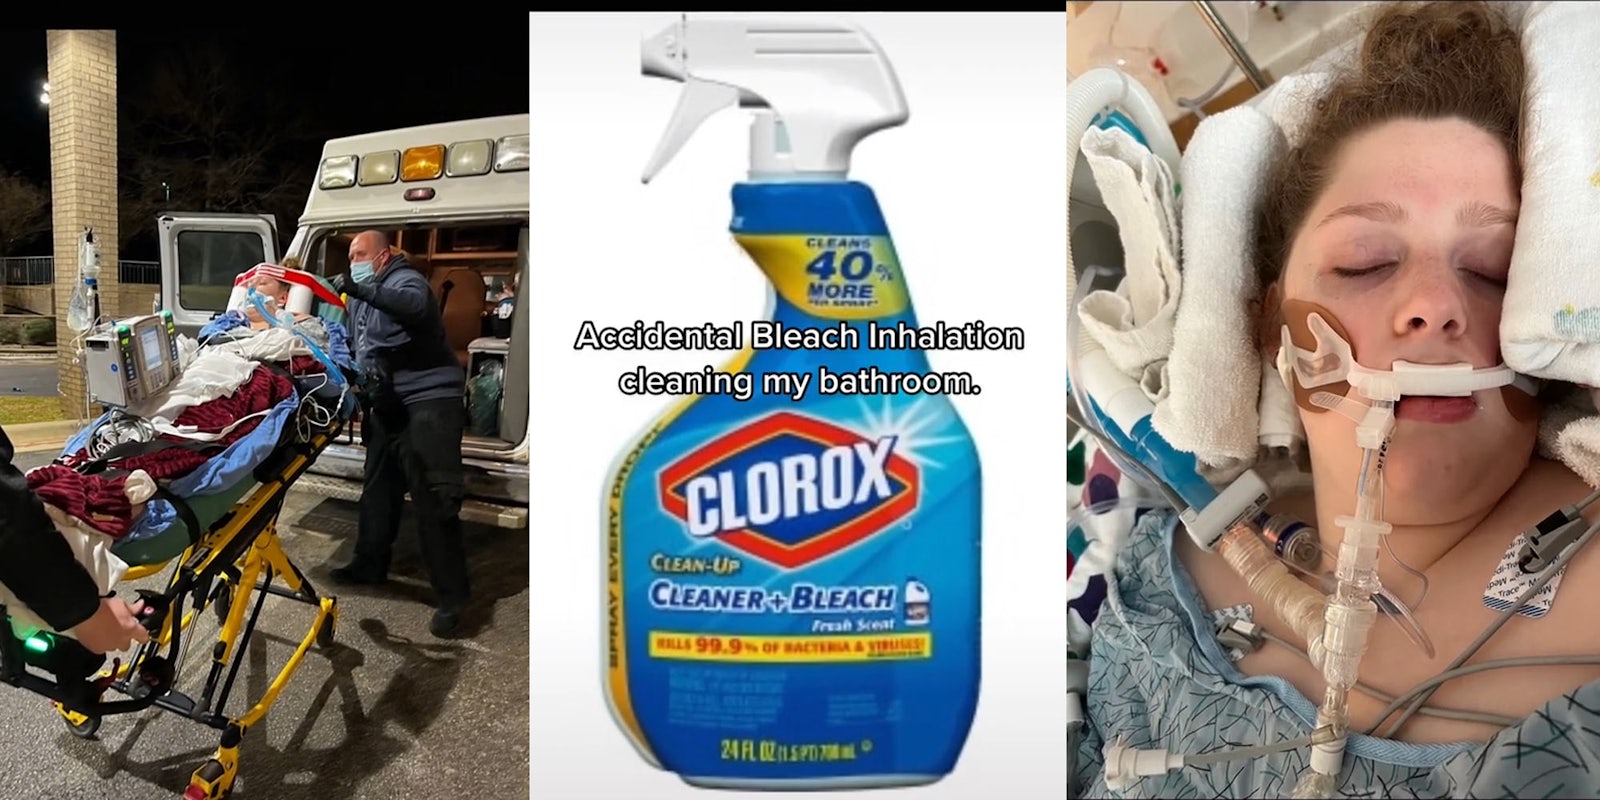 woman on stretcher with breathing tube (l) clorox bleach bottle caption ' Accidental Bleach Inhalation cleaning my bathroom' (c) Woman in hospital breathing tube (r)